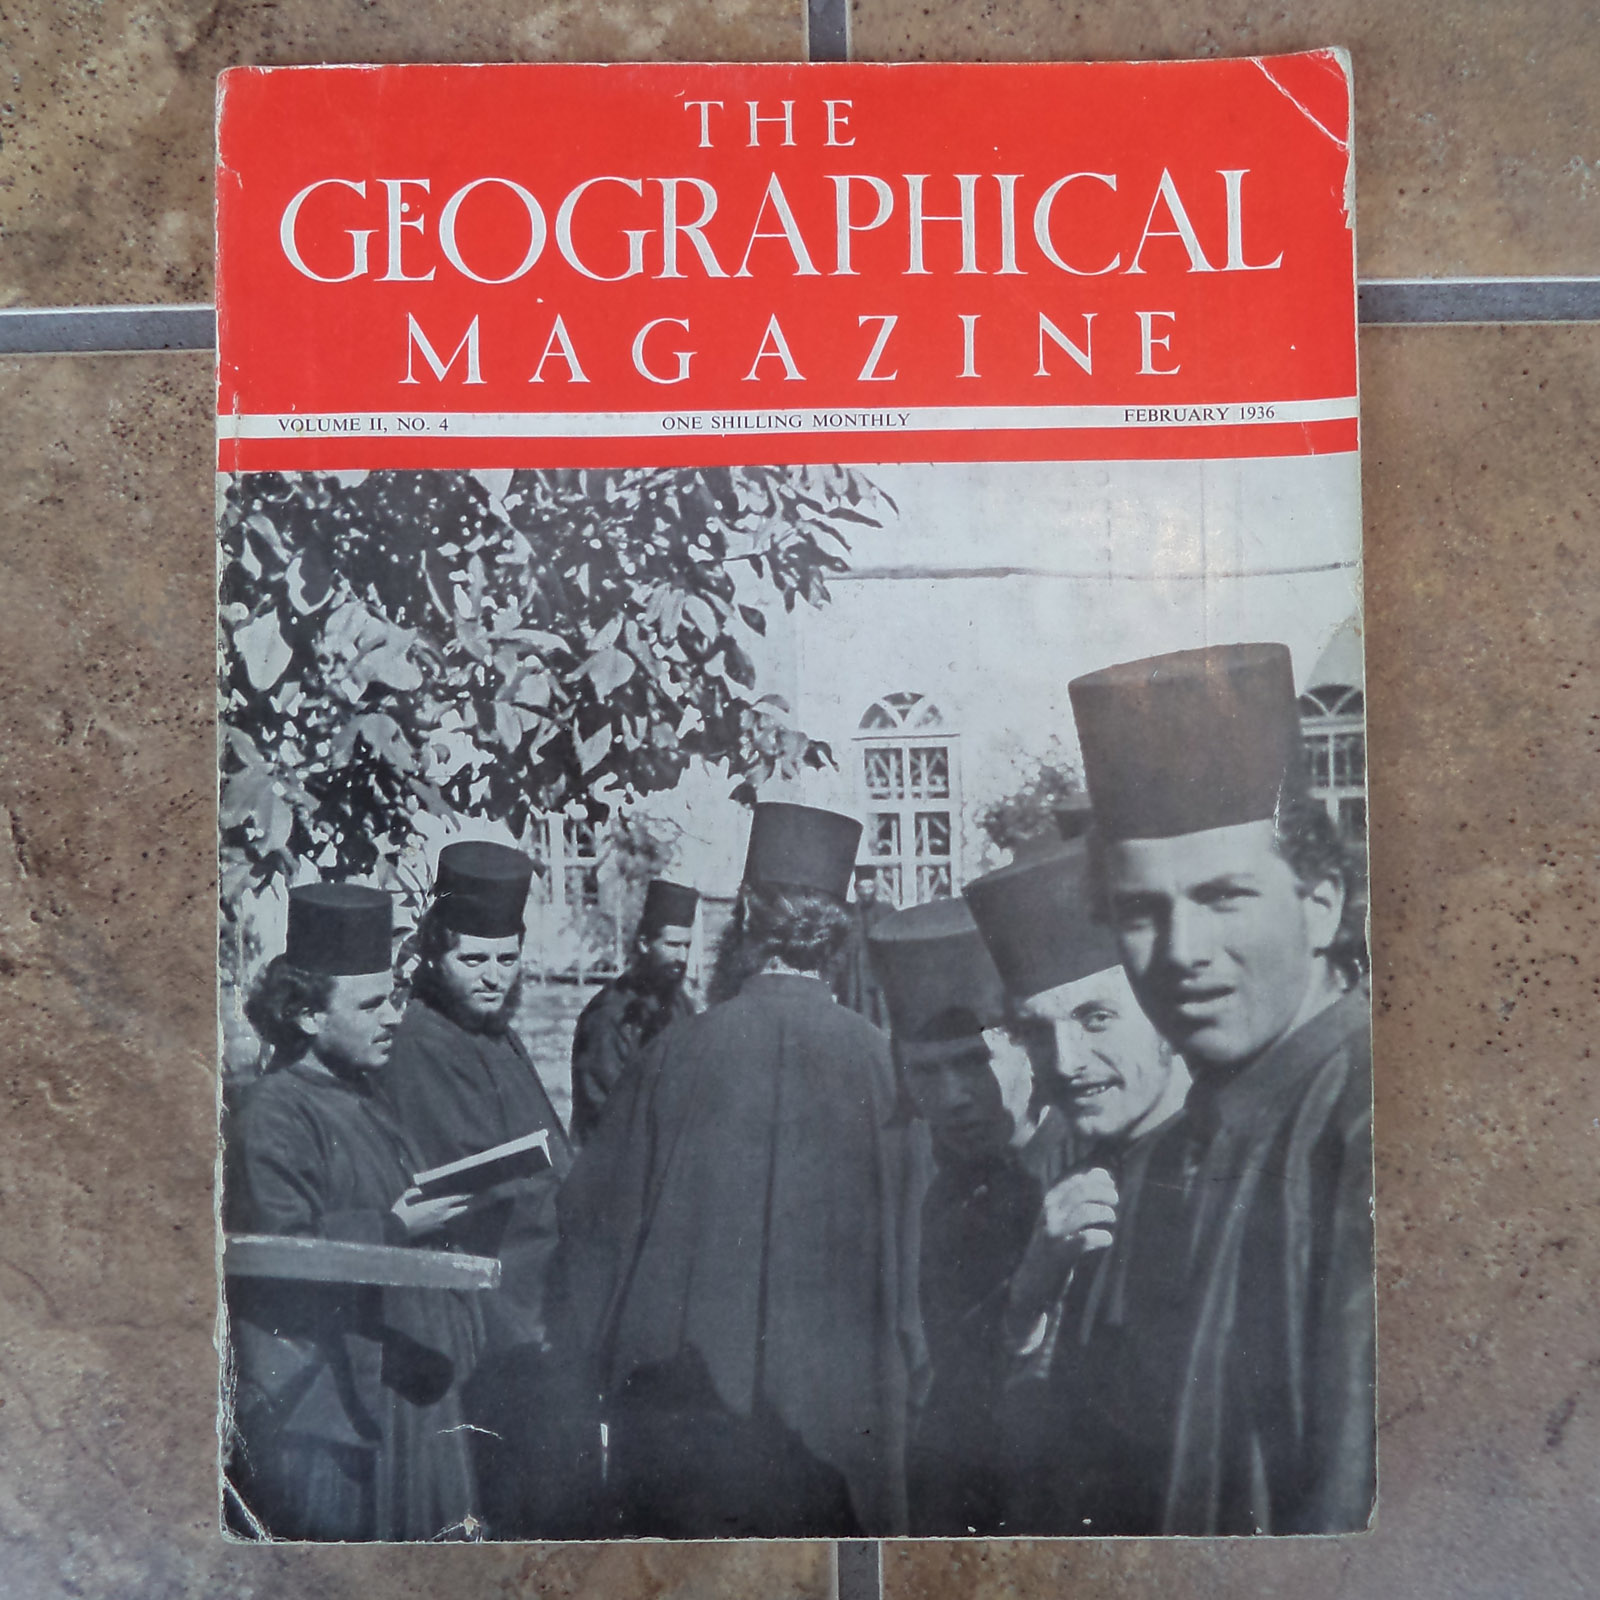 The Geographical Magazine February 1936